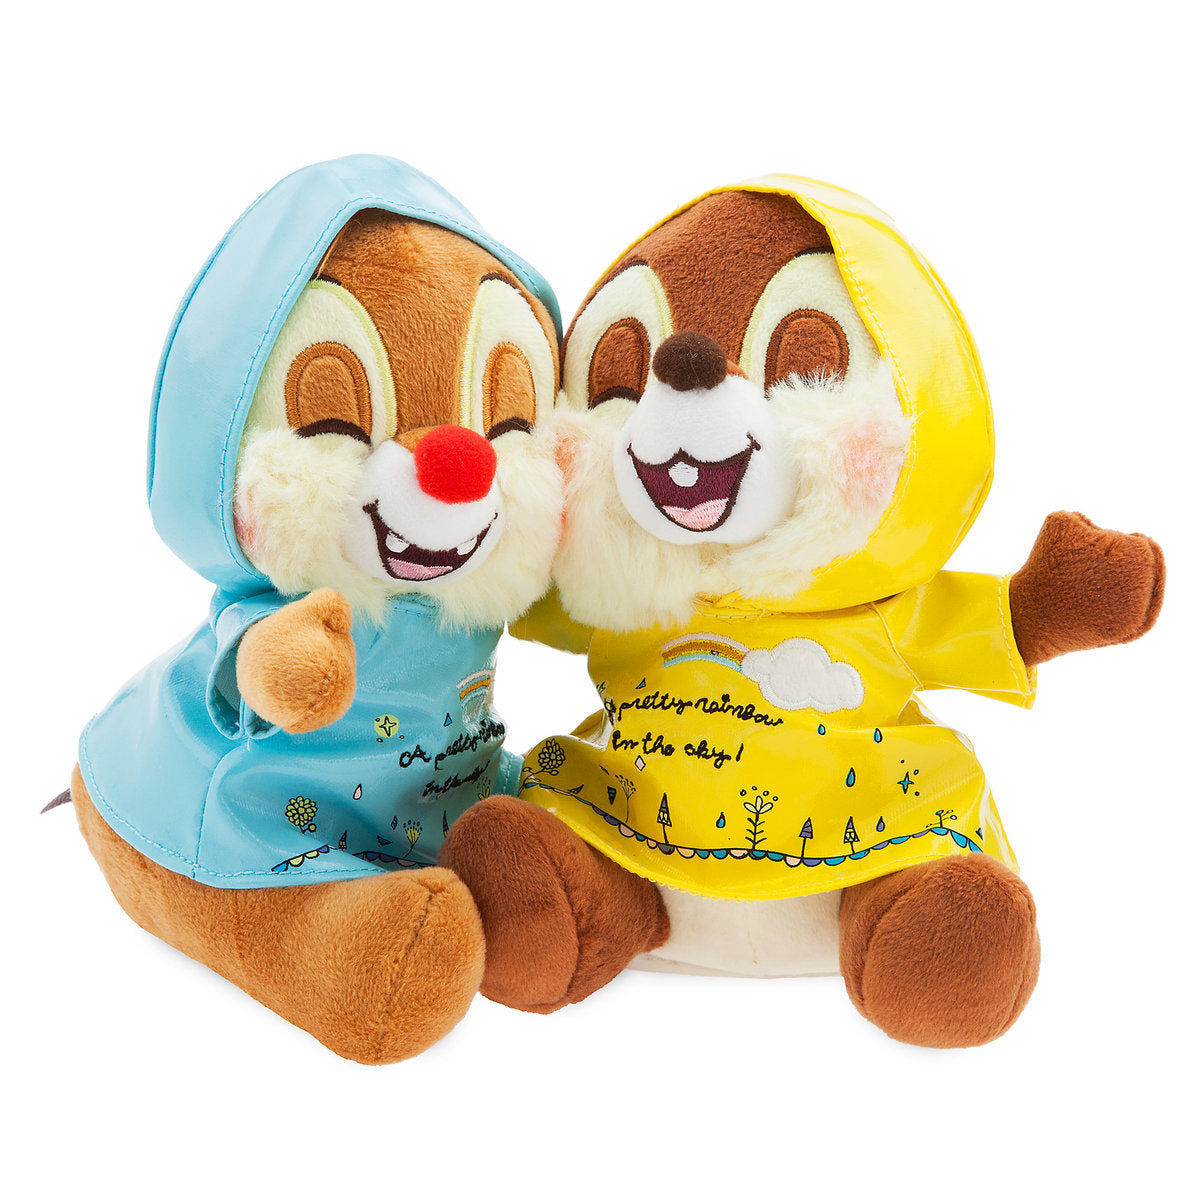 Disney Chip 'n Dale Rainy Day Plush Set Small New with Tags